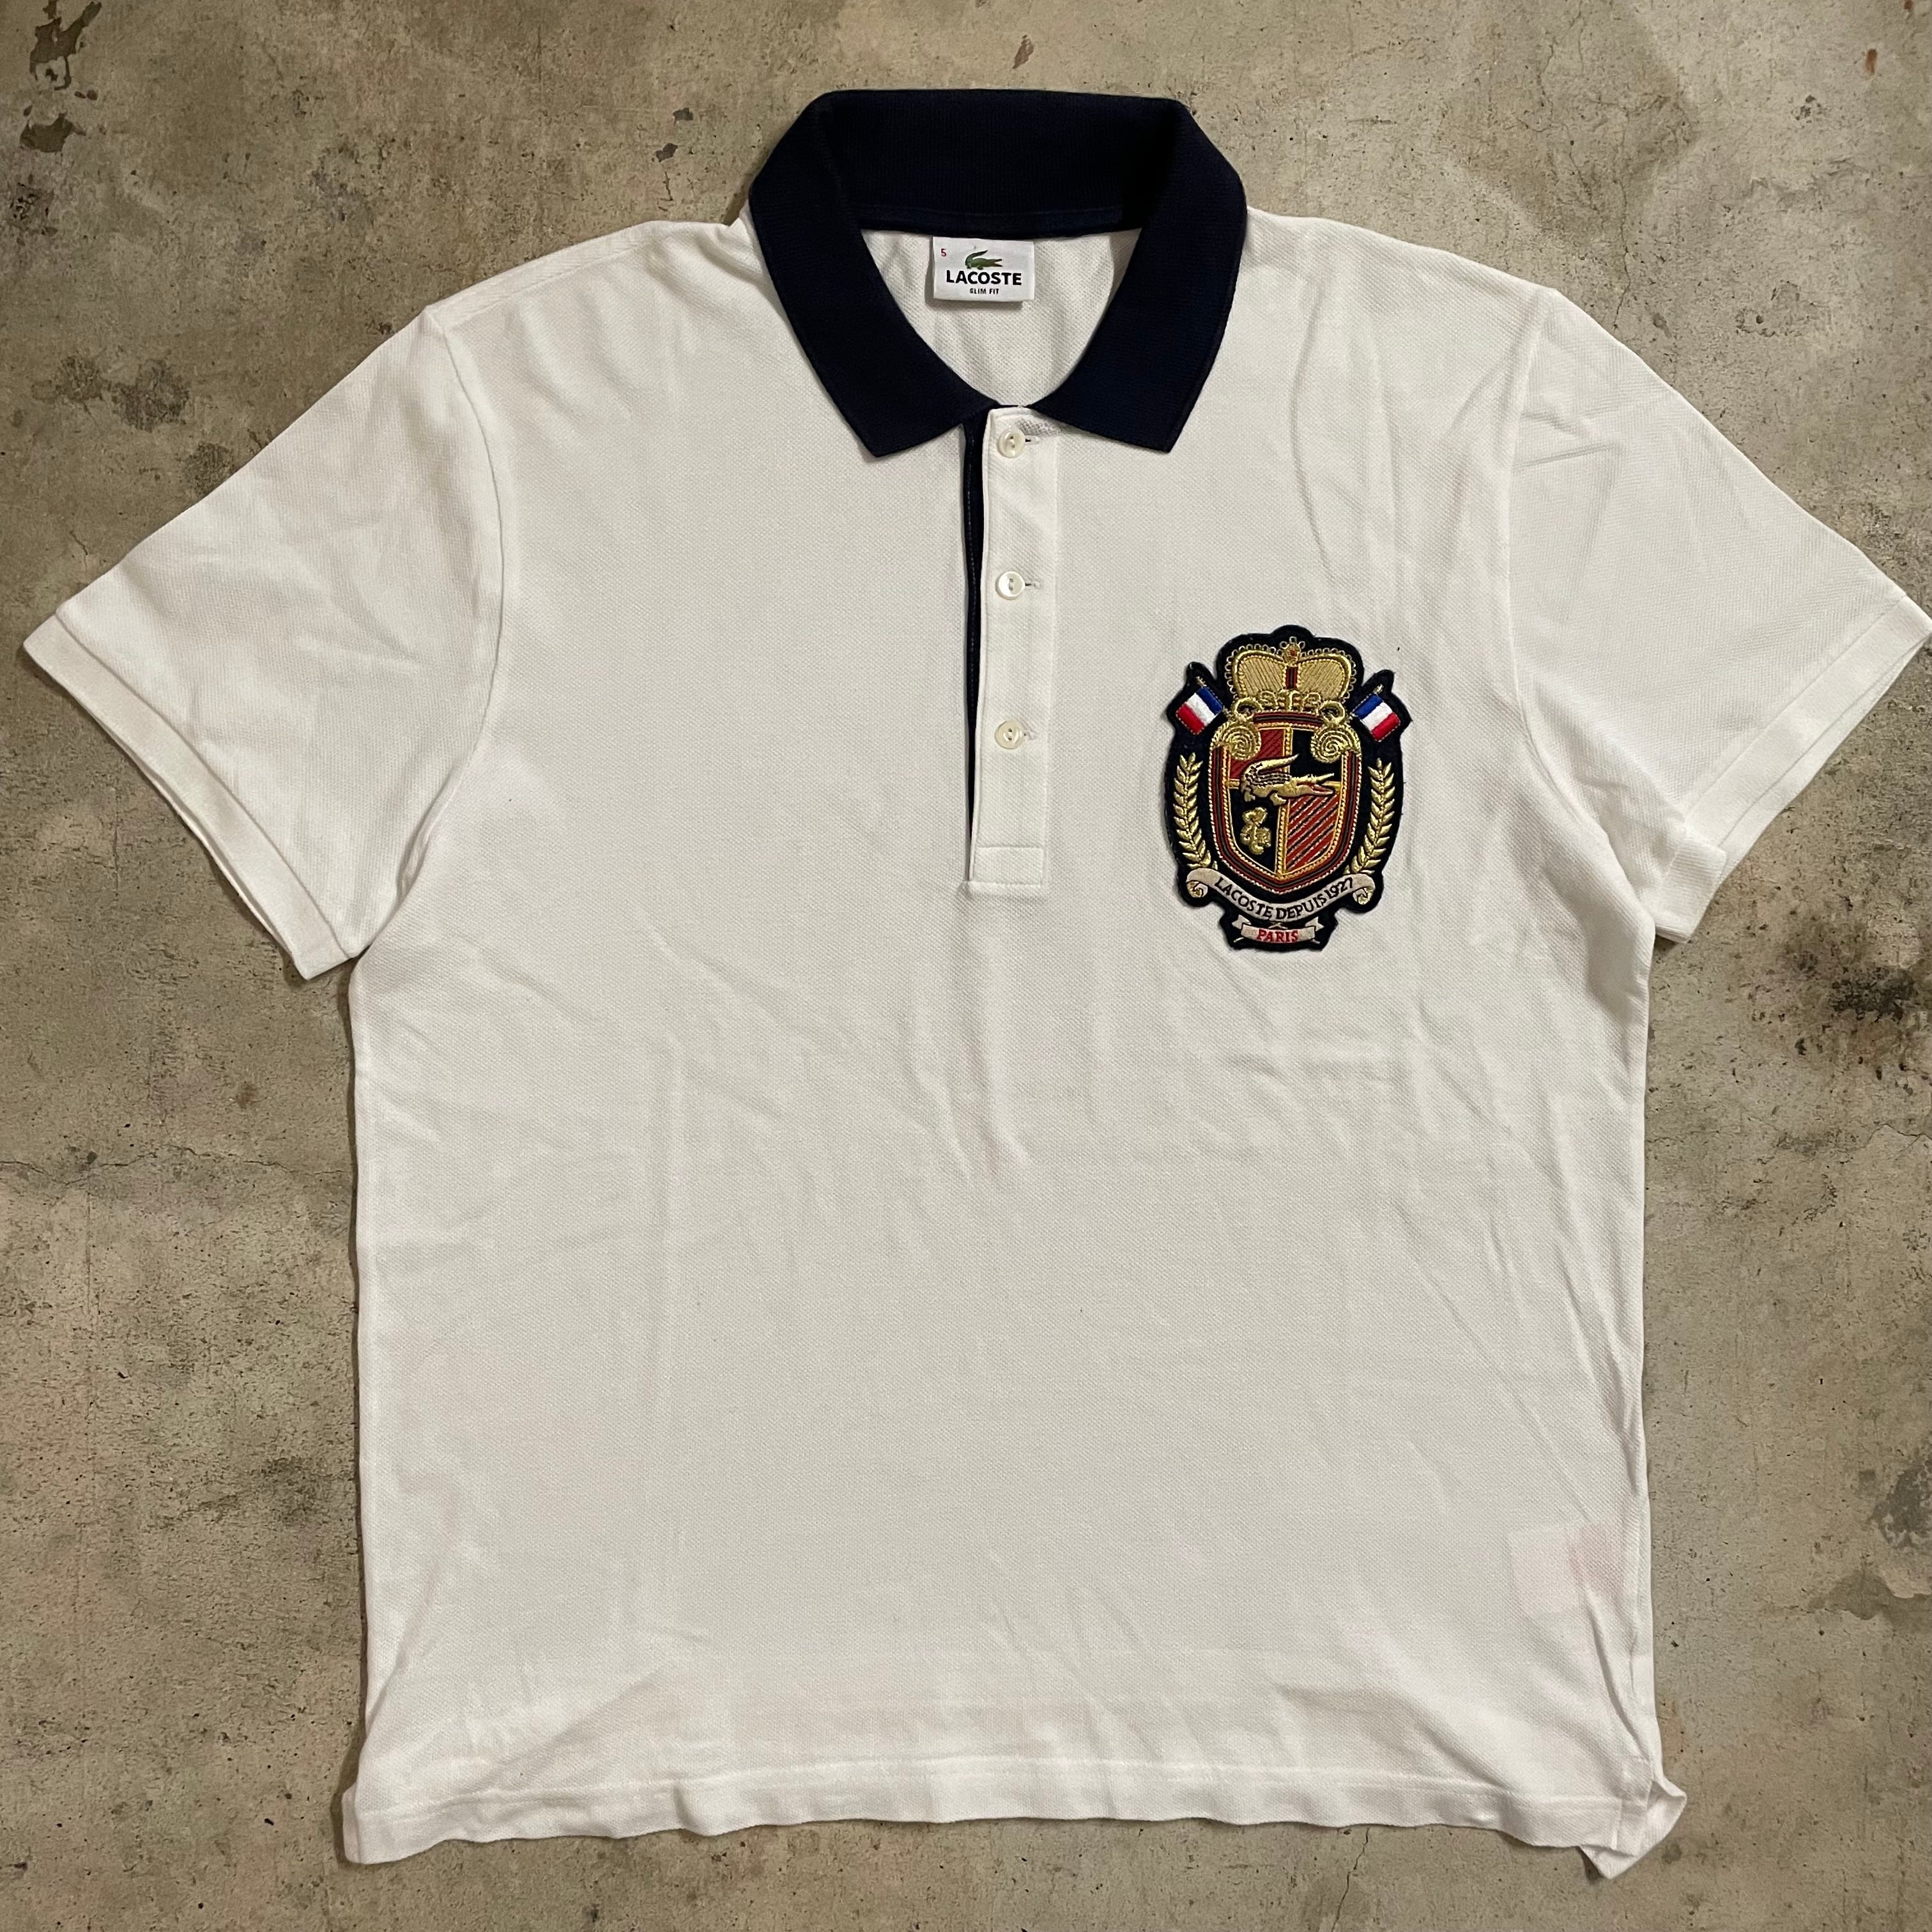 LACOSTE】France embroidery design cotton polo shirt/ラコステ